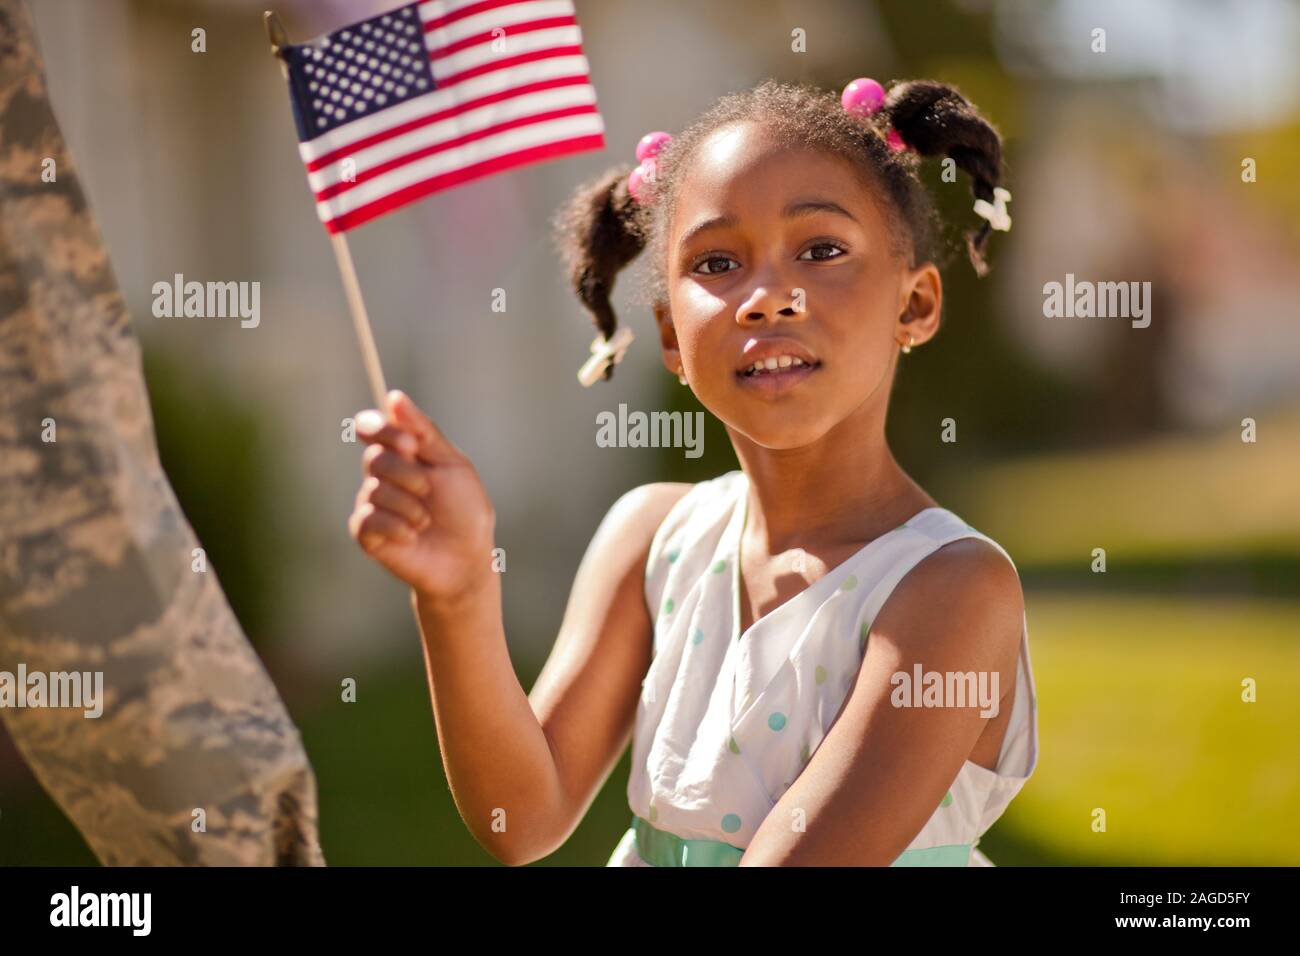 Portrait of a young girl waving an American flag. Stock Photo